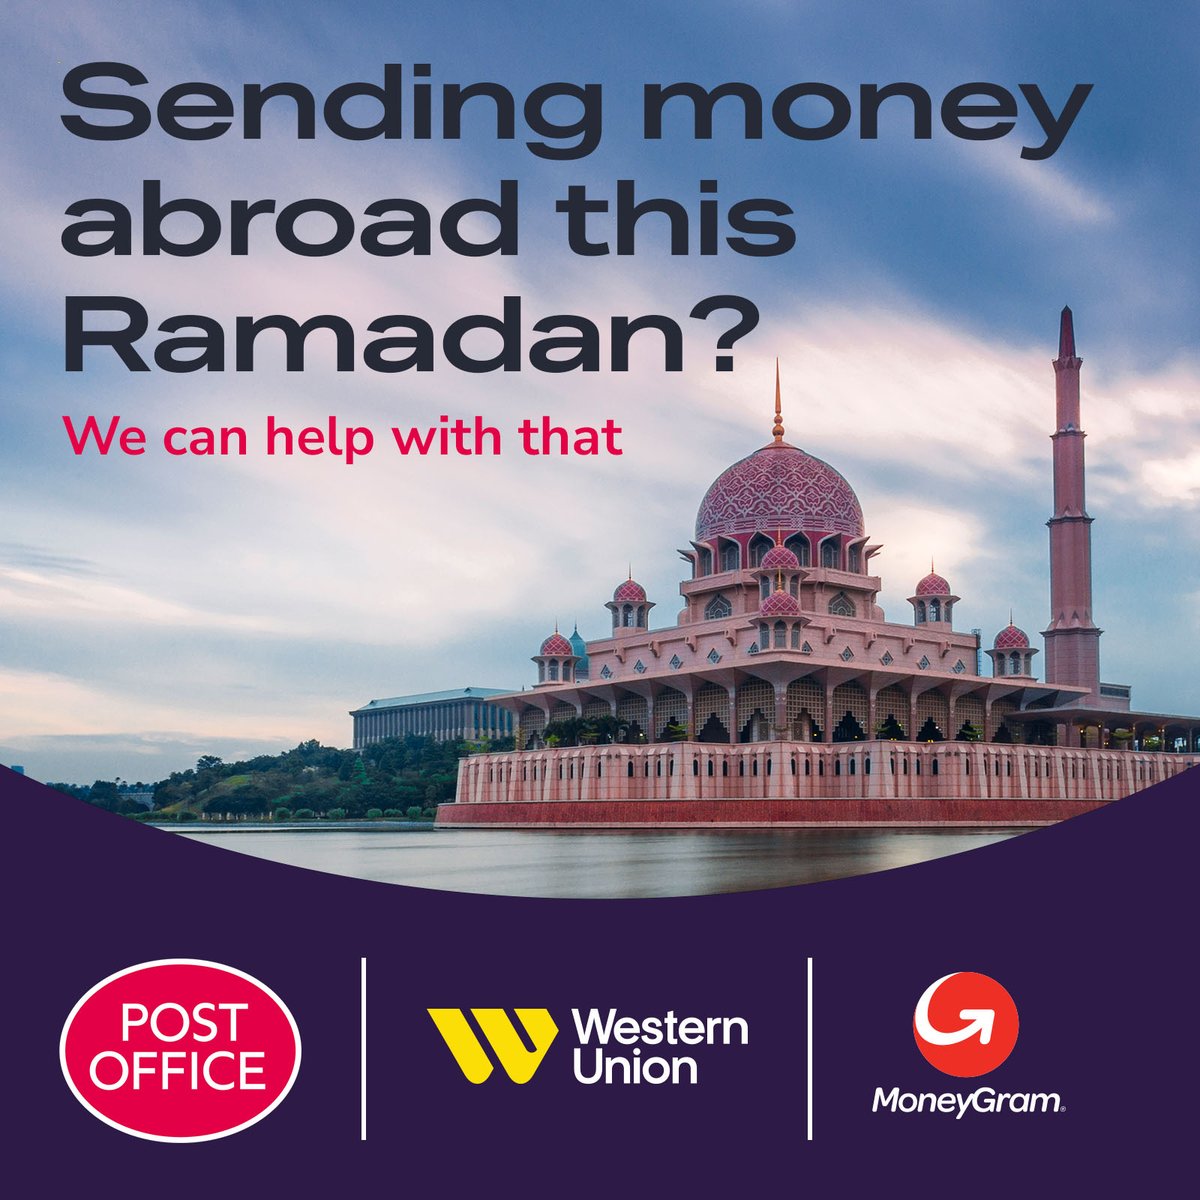 Send money abroad for Ramadan in no time with MoneyGram and Western Union at Boscombe East 💸💷​

#MoneyTransfer #WeCanHelpWithThat #Ramadan